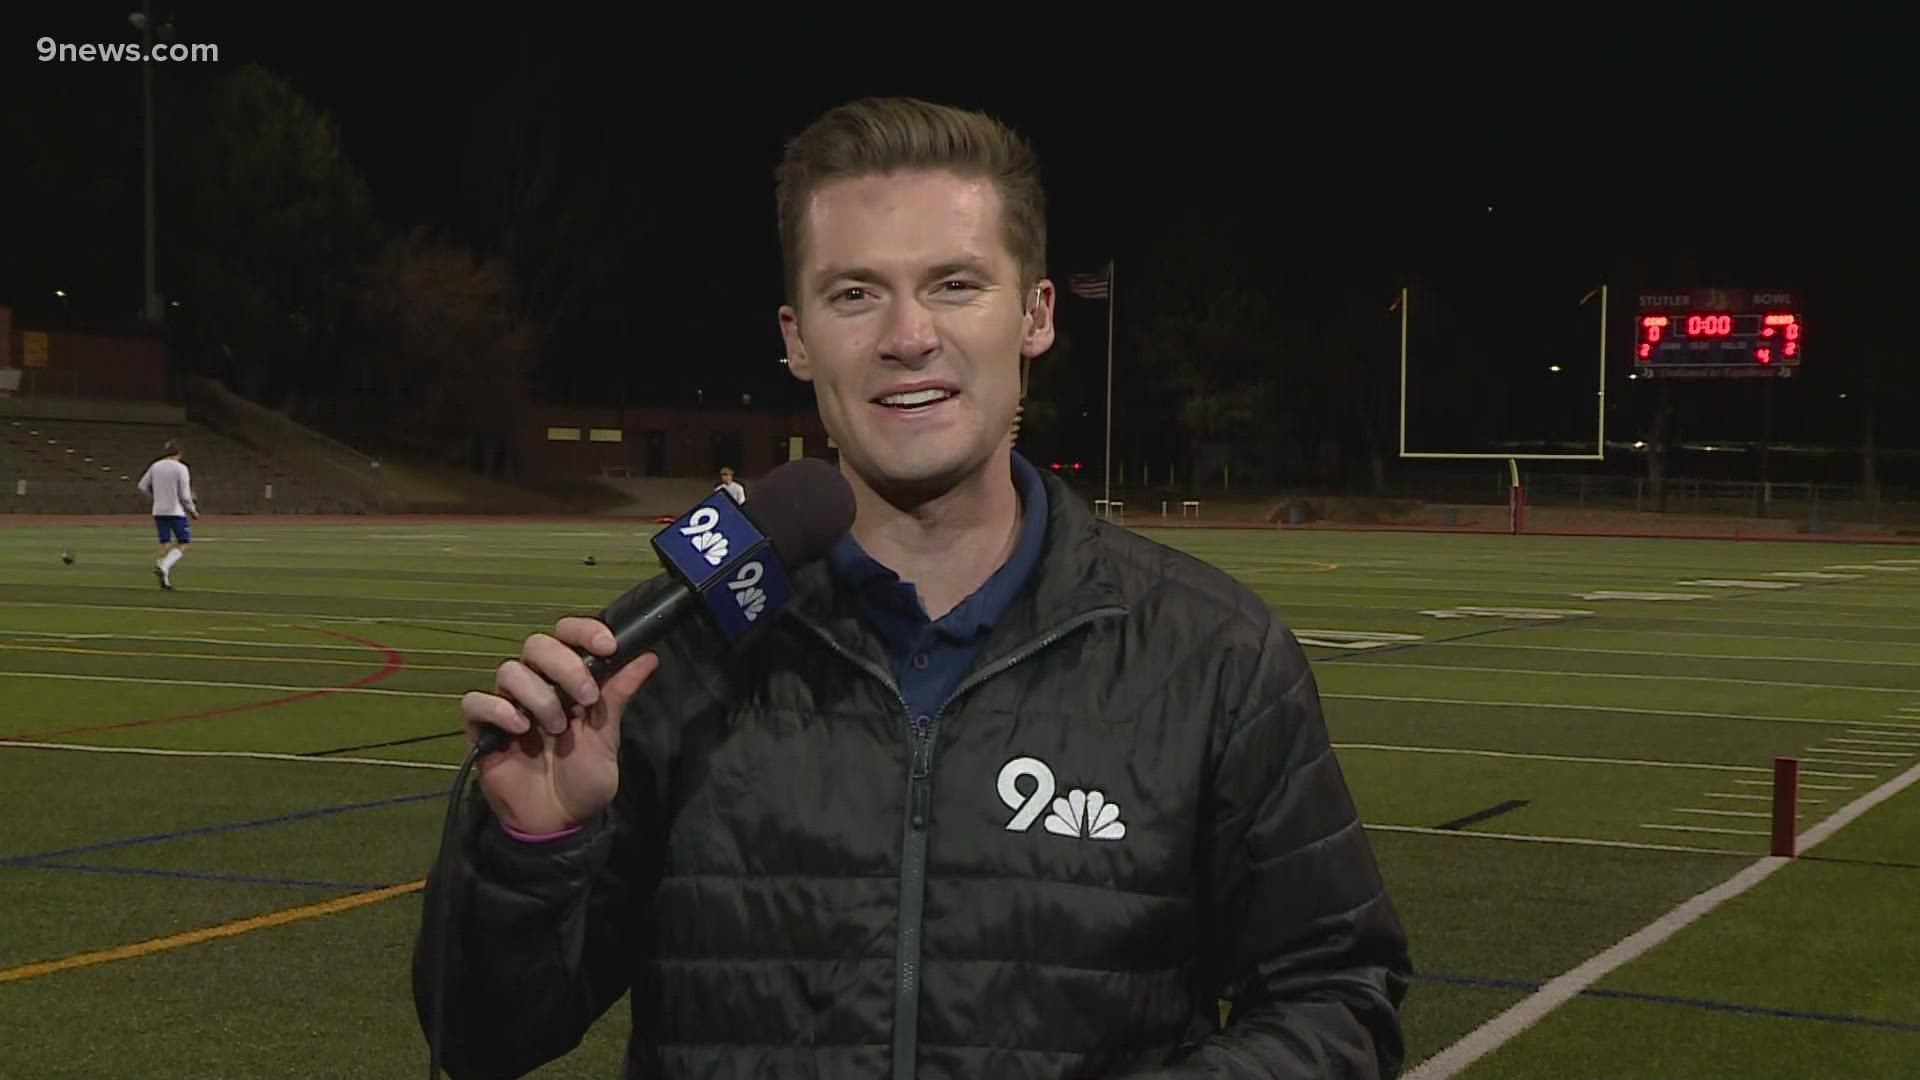 Scotty Gange reports live from Stutler Bowl ahead of Cherry Creek's playoff game against Regis Jesuit in the 5A quarterfinals.